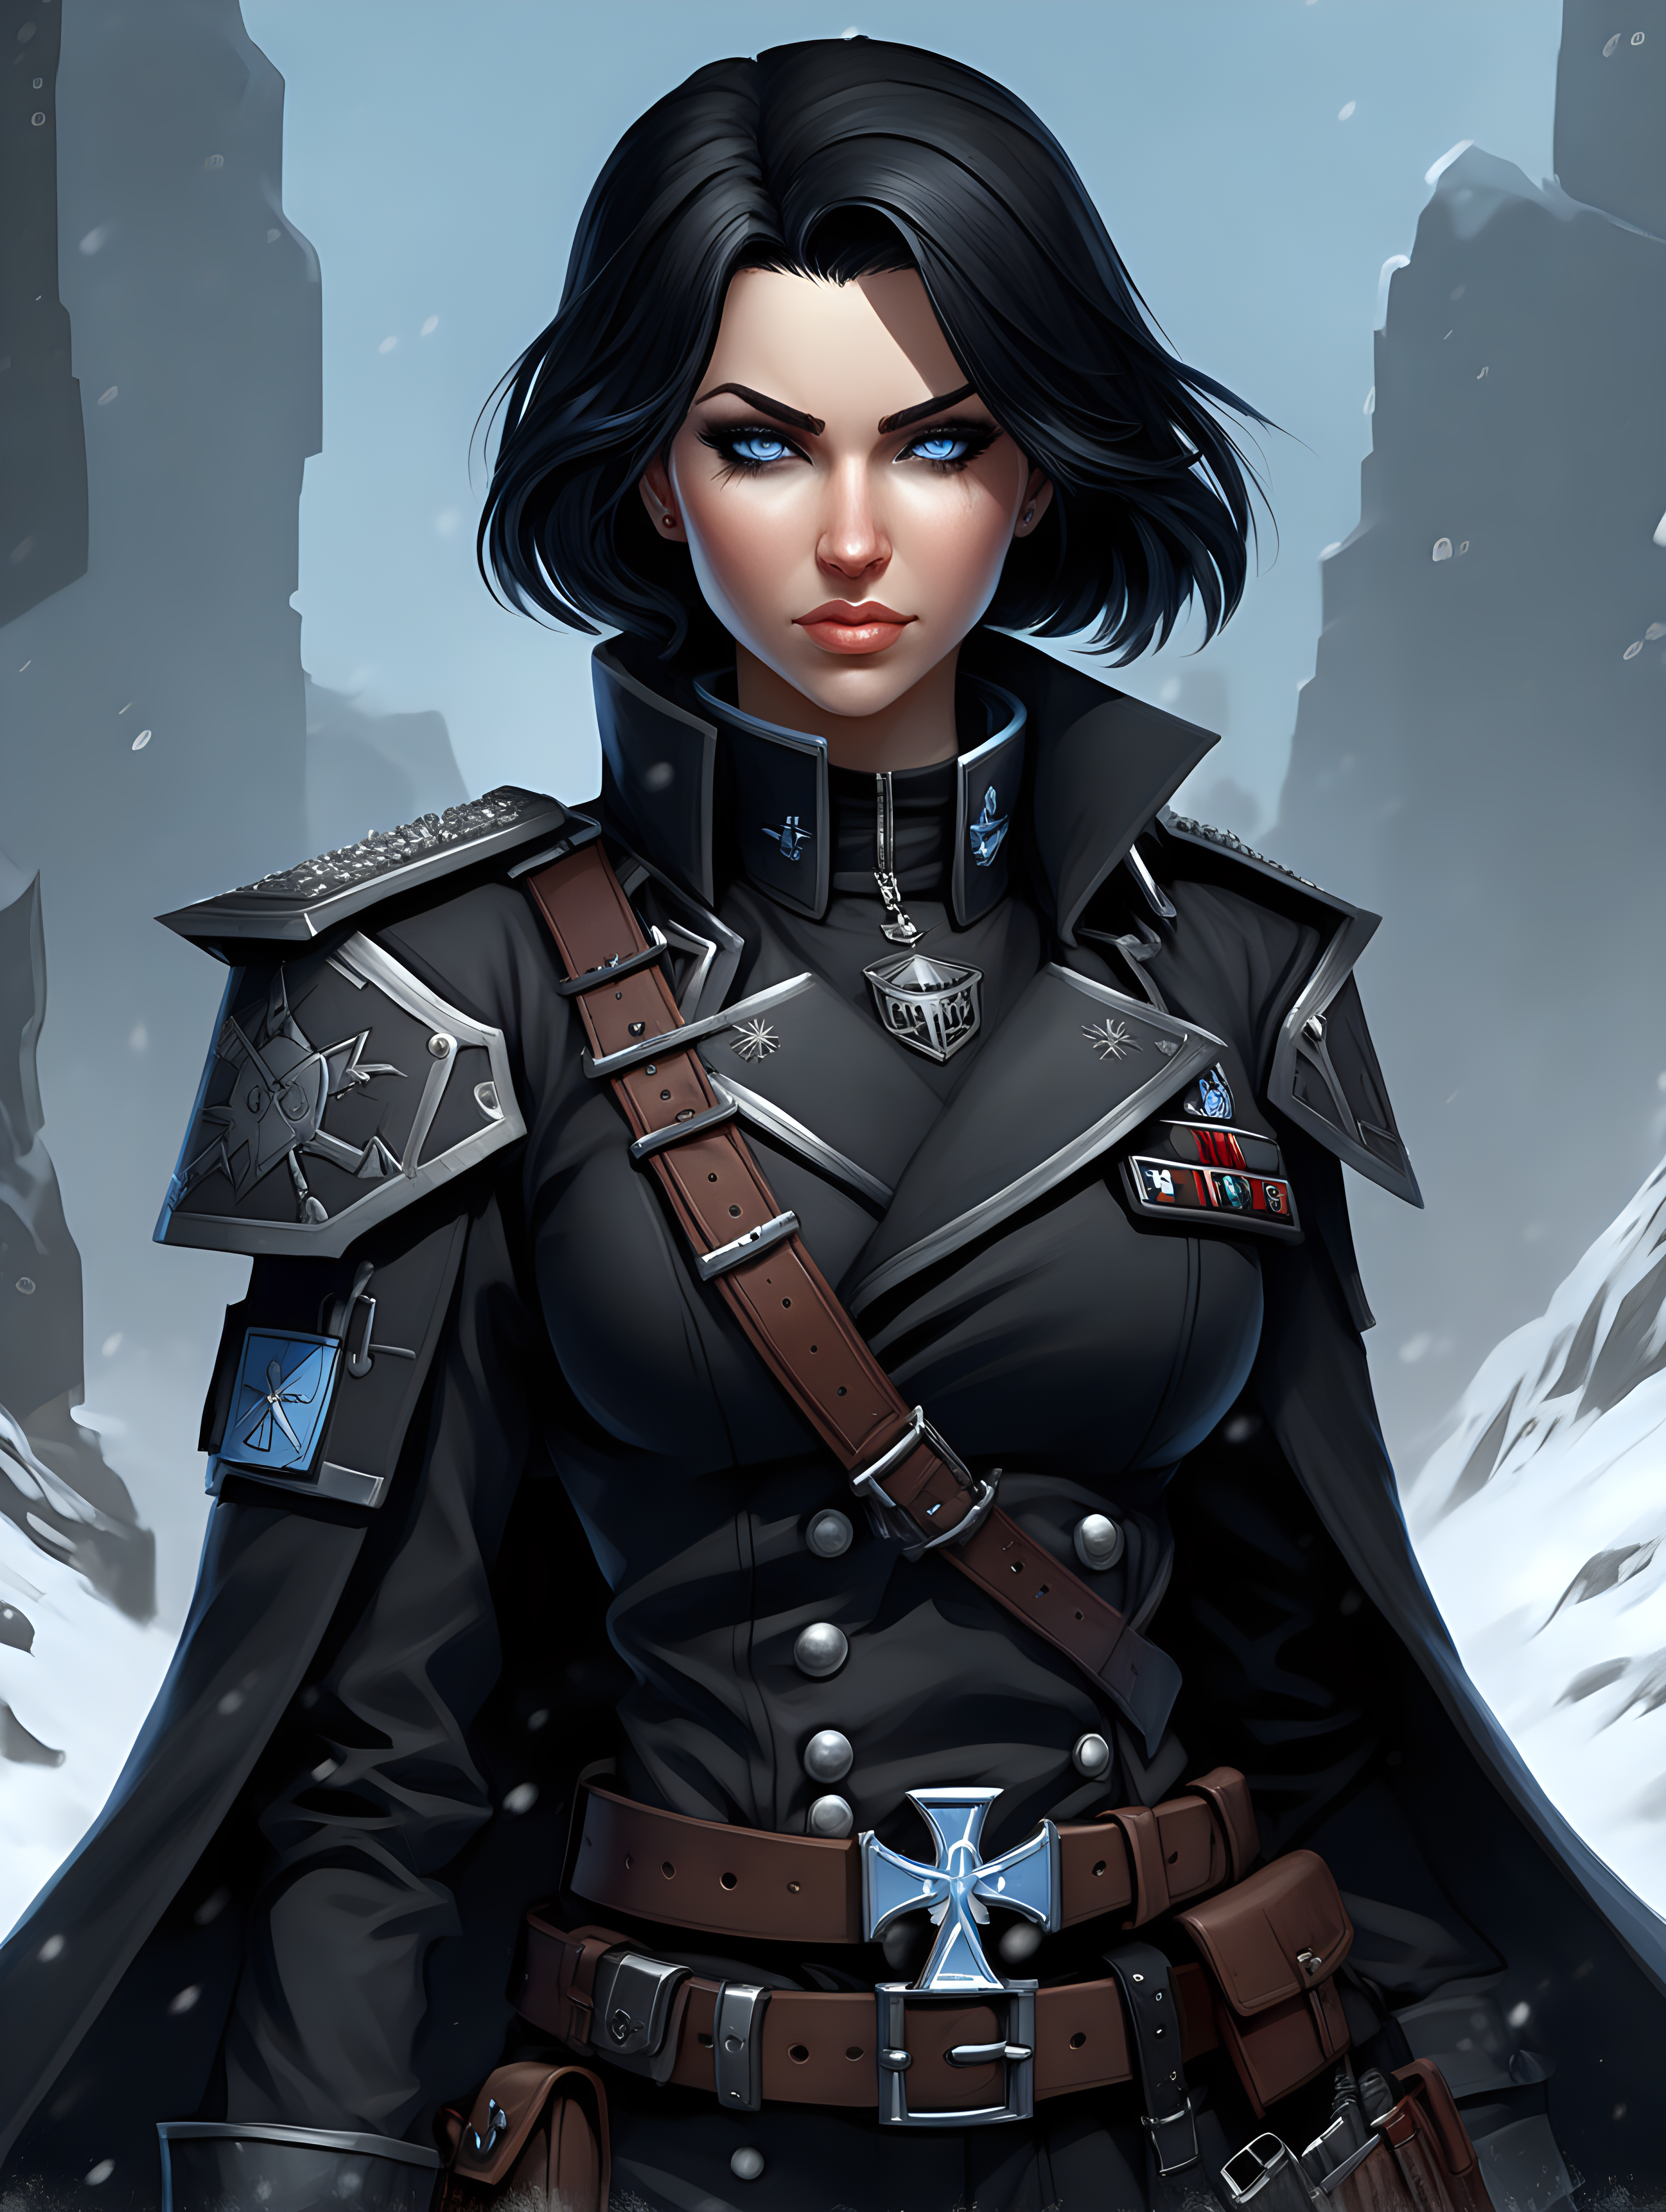 Warhammer 40K young Commissar woman She has an